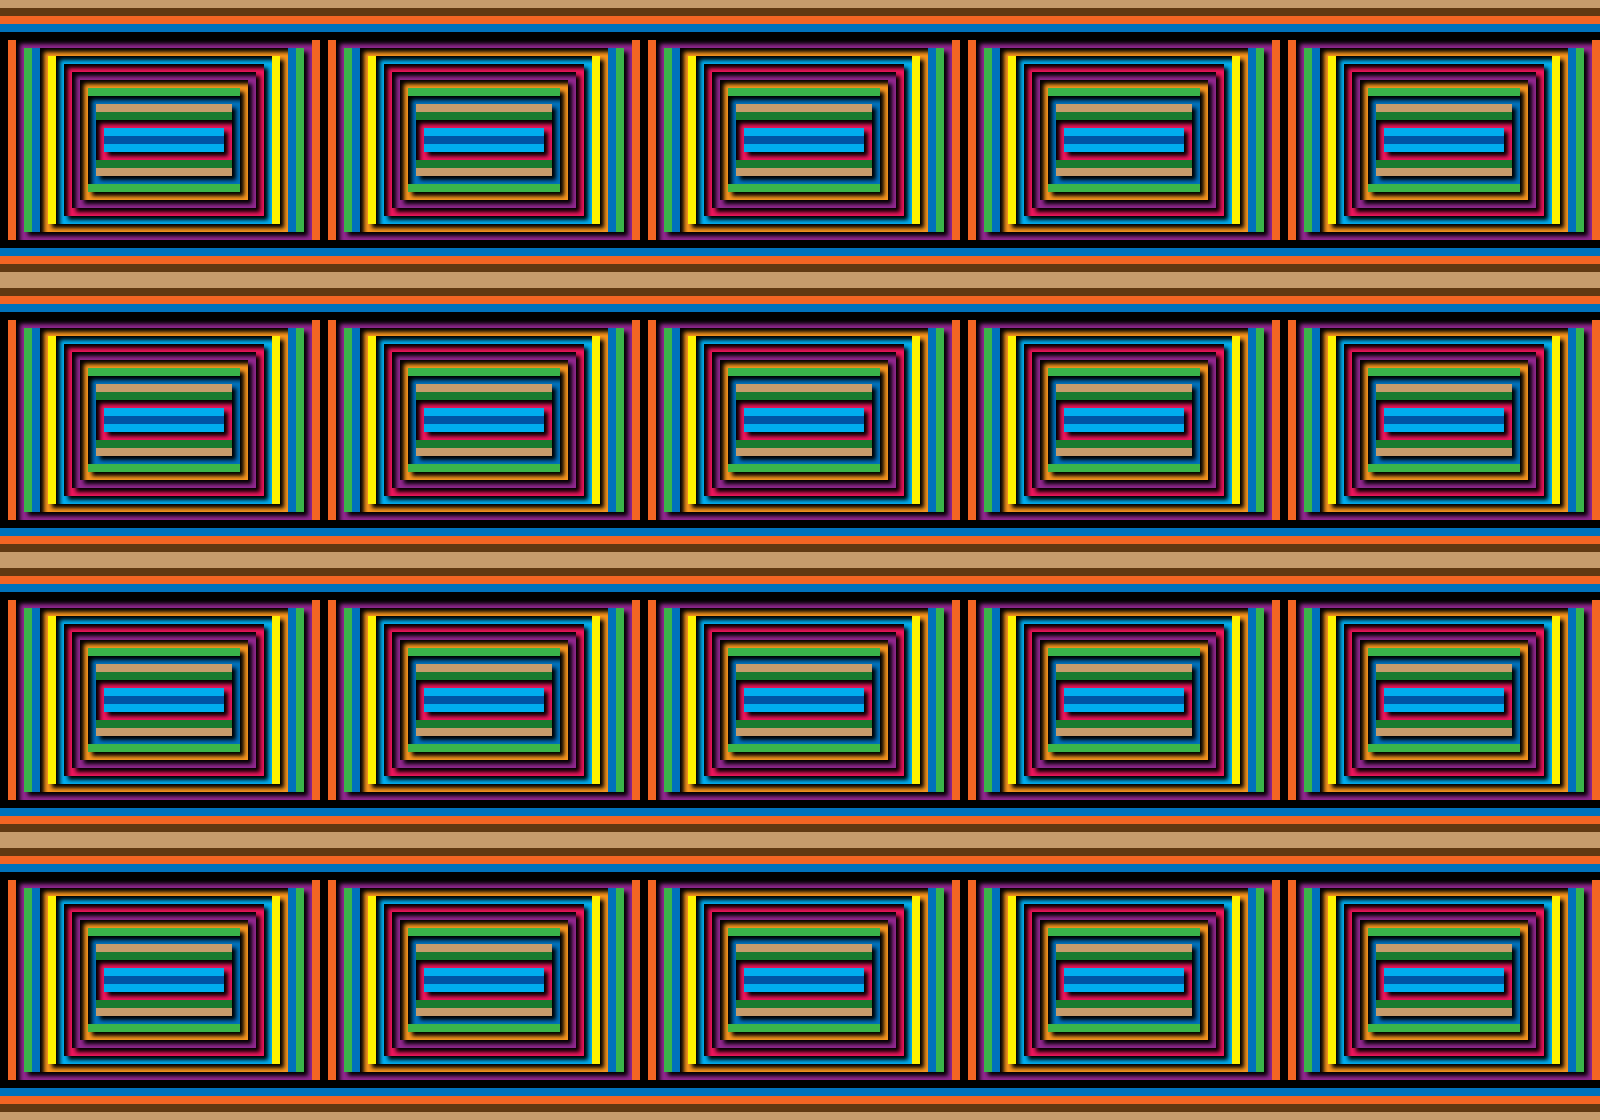 The flat version of the coffer illusion